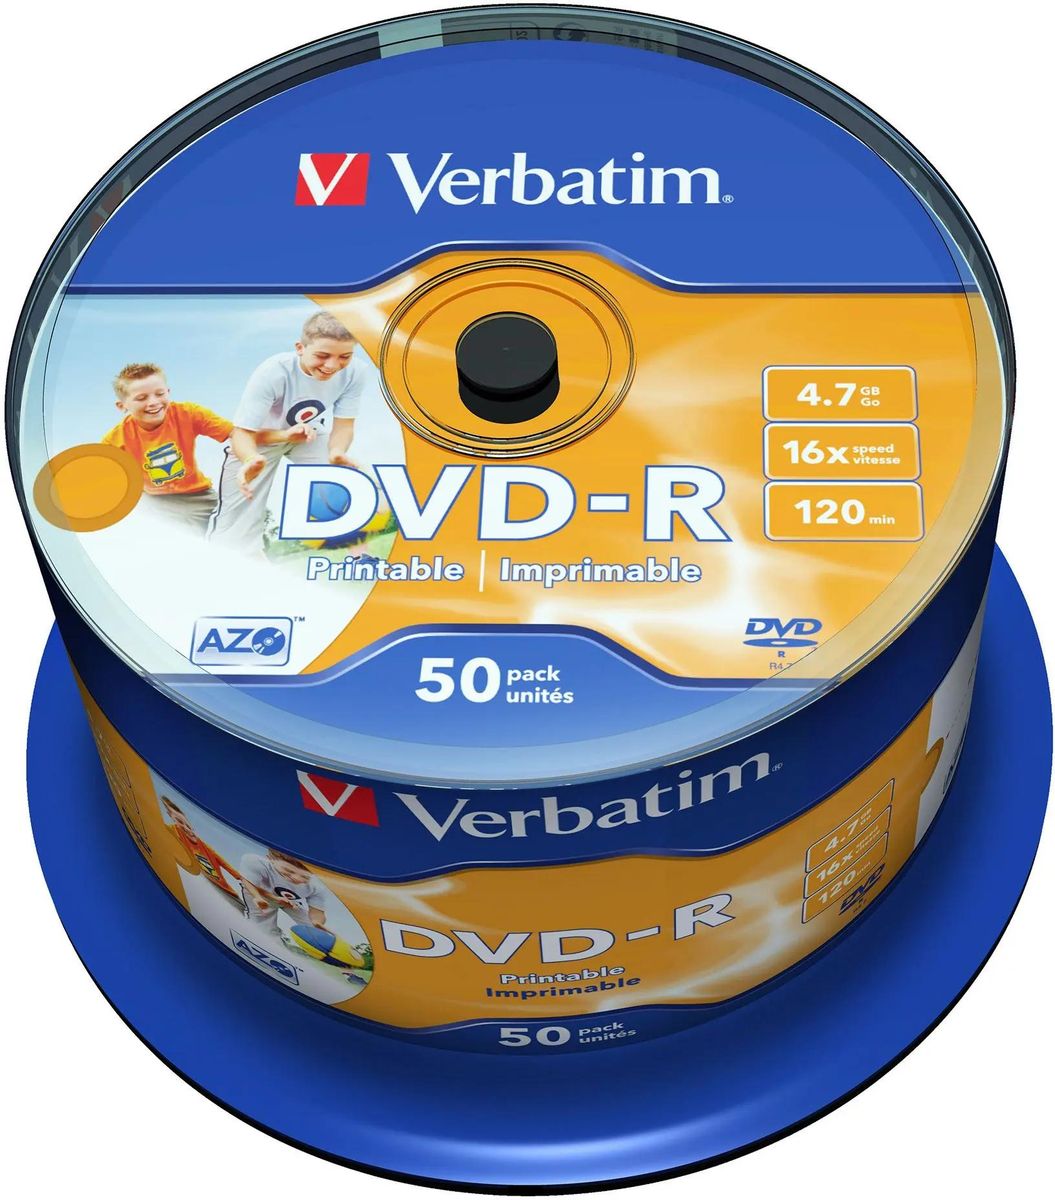 50 Pieces 3 Inch Blank DVD-R Discs Disk 1.4 GB Recordable Media Disc 1-4 X  Printable Mini DVD-R Blank Discs Media Disk for VCR Video Camera